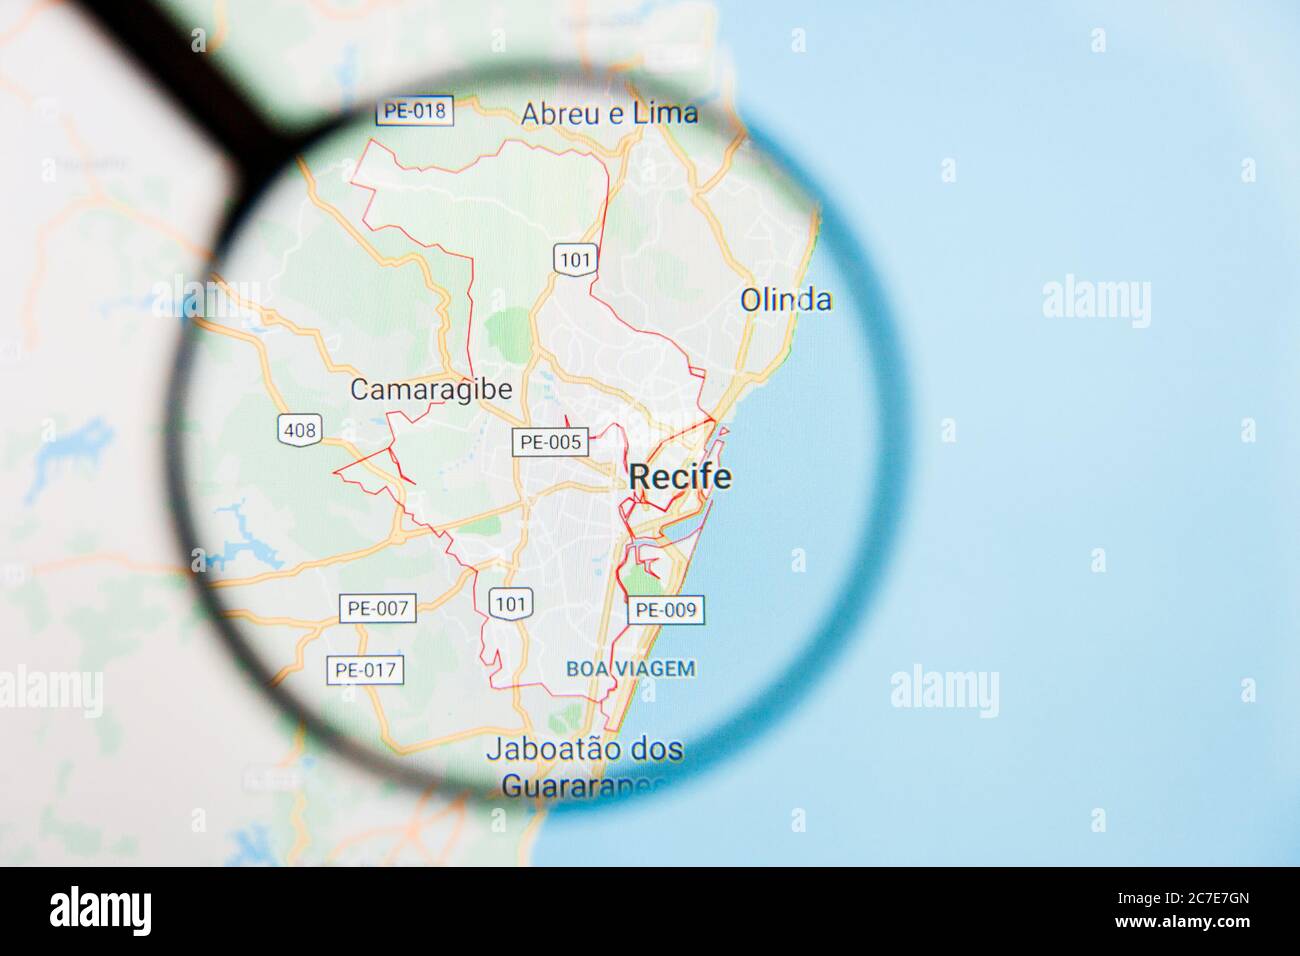 Recife, Brazil city visualization illustrative concept on display screen through magnifying glass Stock Photo